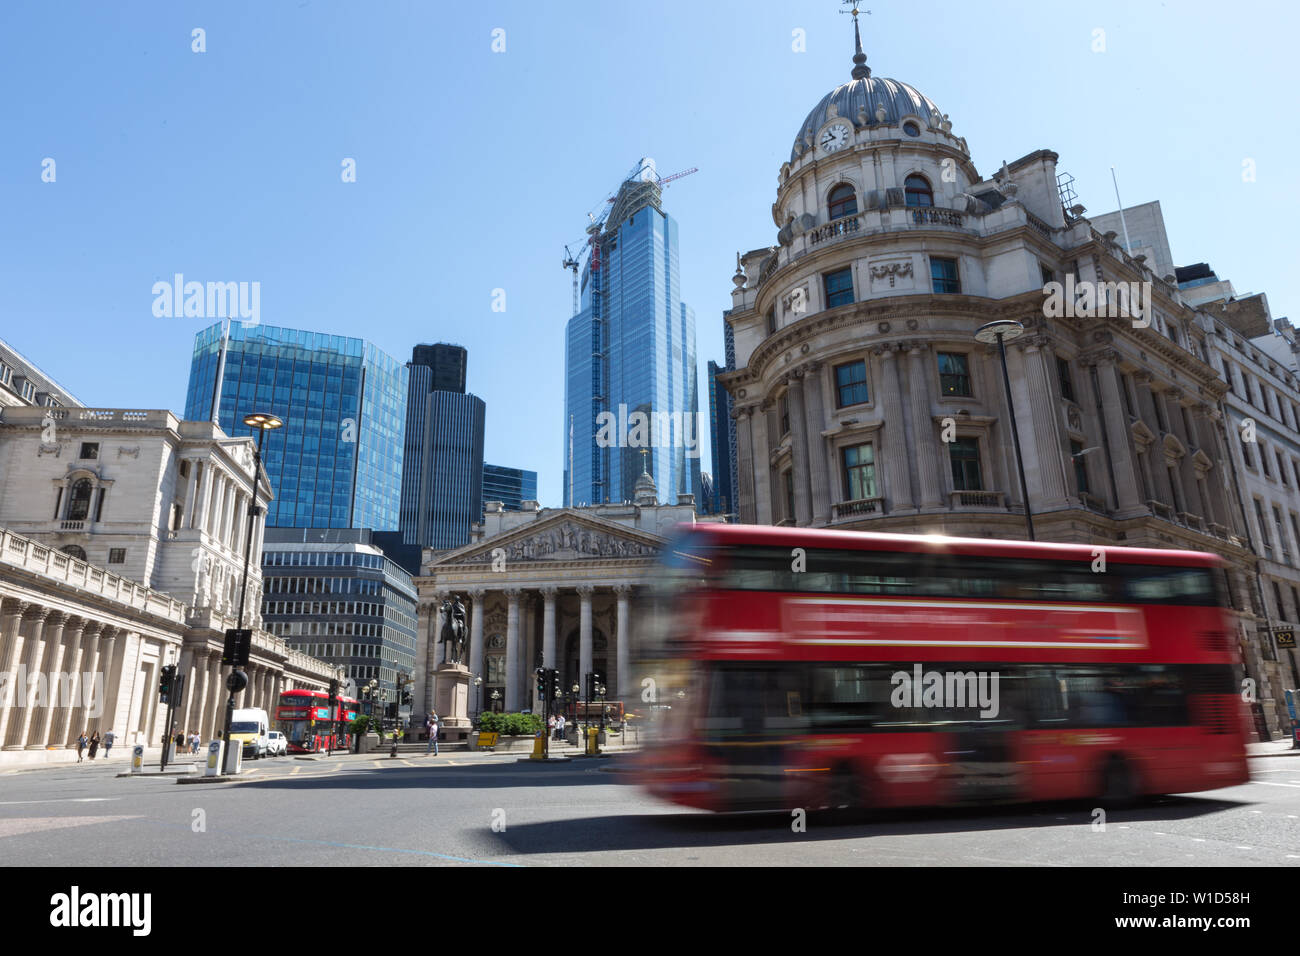 The Bank of England on the left and the Royal Exchange at centre are two of the many significant buildings in the City of London Stock Photo